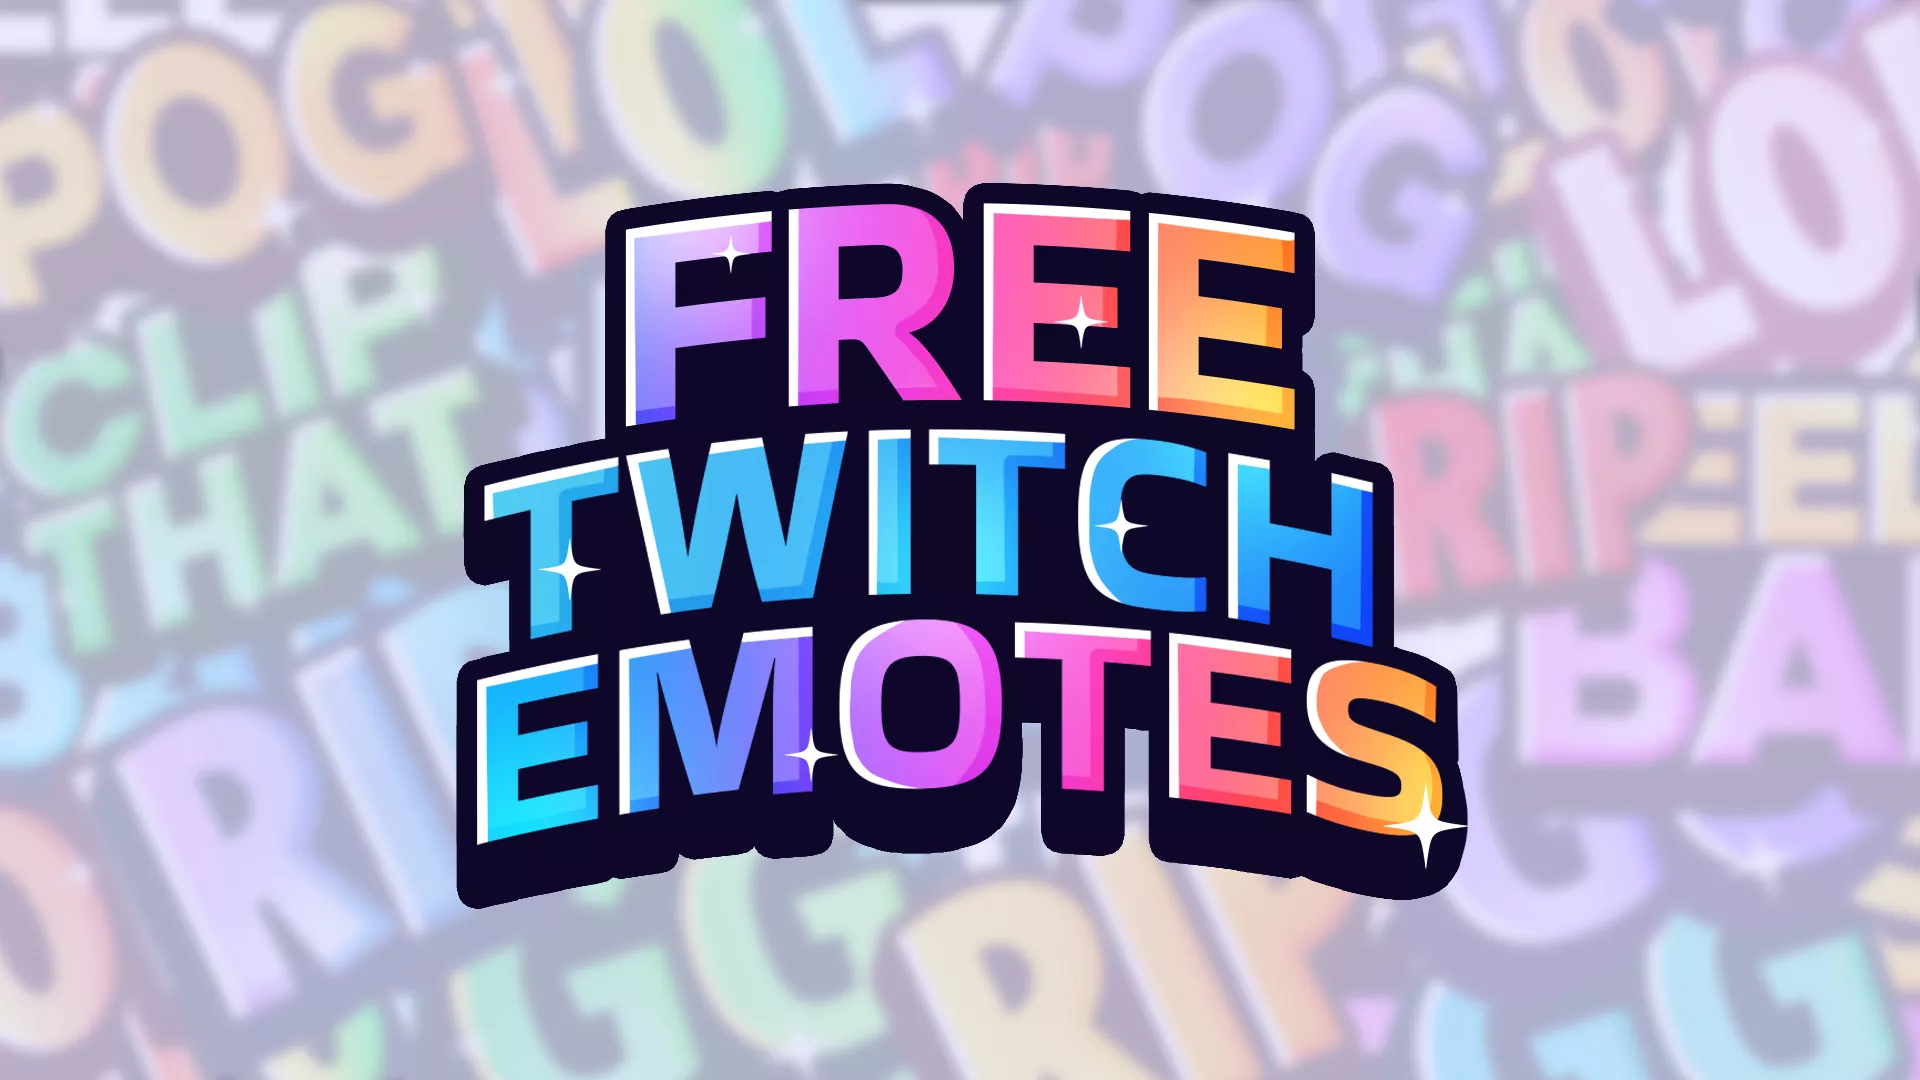 Get Free Twitch Emotes and Enhance Your Streaming Experience